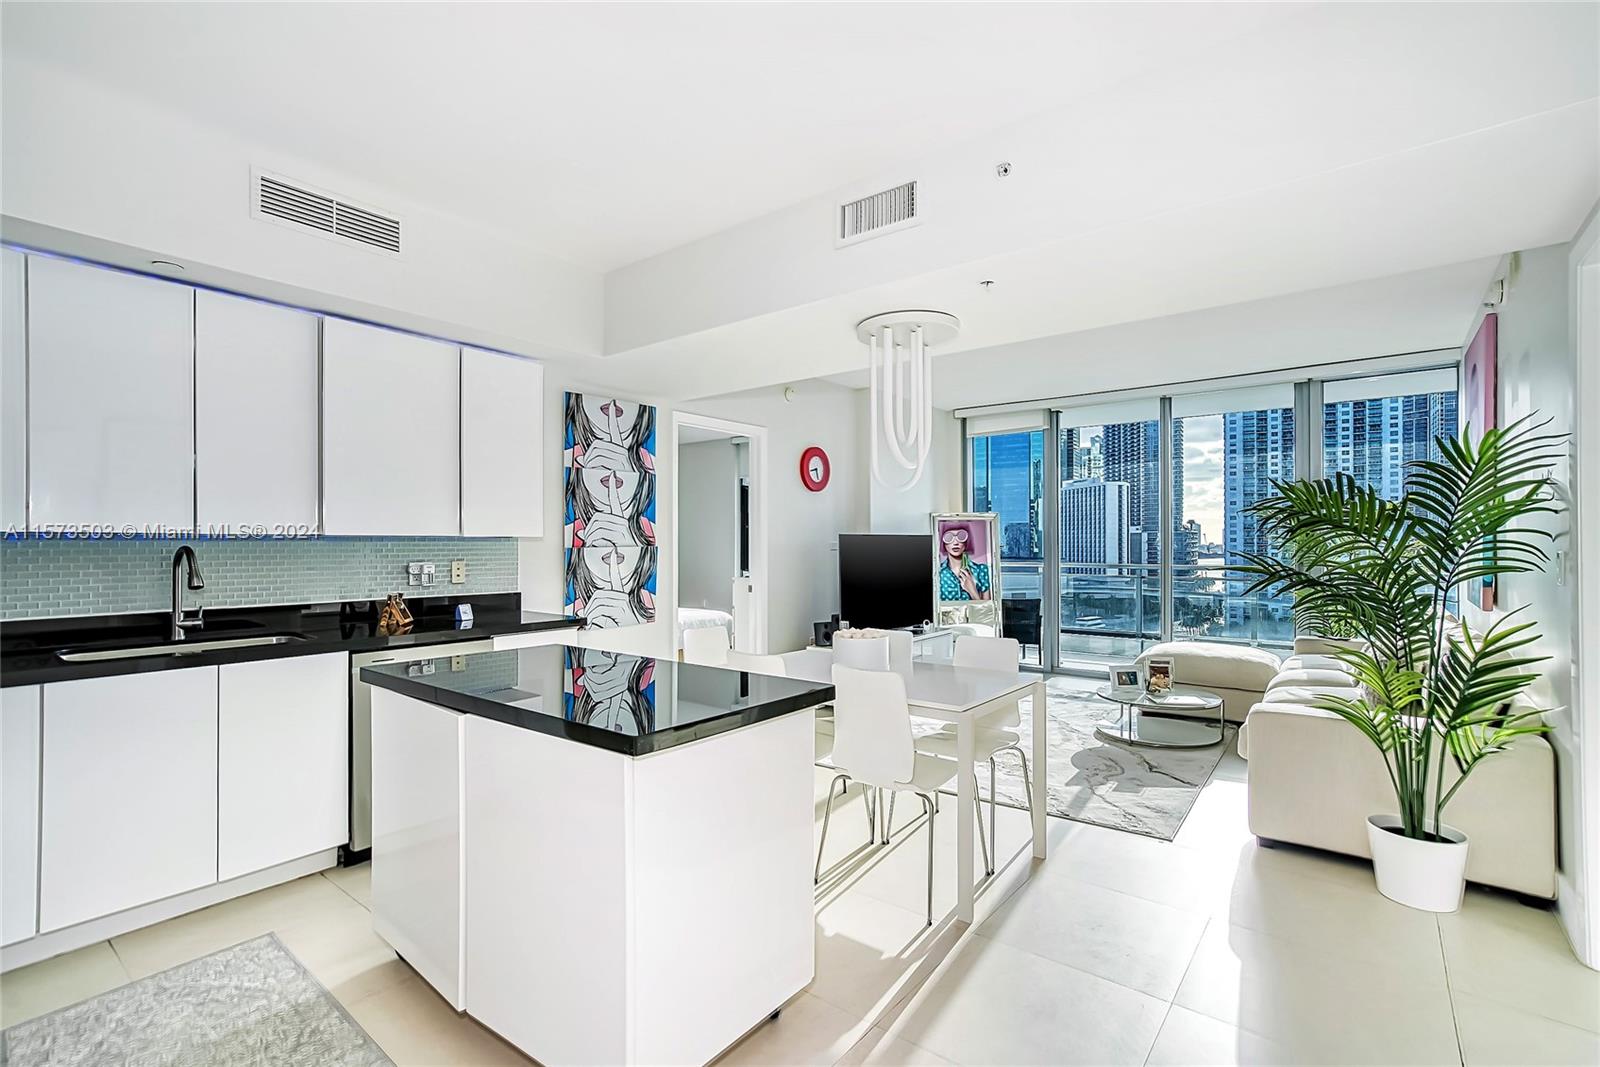 Rarely available stunning fully furnished 2/2 waterfront unit with a split layout for maximum privacy between the two spacious bedrooms, offering both - panoramic city & Brickell City Center and Miami River views. Mint Condo is a luxury gated community on the River across from the Brickell City Centre. Best line in the building without trains and I-95 noises. The building features top amenities including an infinity pool, jacuzzi, fitness center, separate spa area and 24-hour valet and Concierge. Located within walking distance to Mary Brickell Village, it's also minutes from Miami Beach and the airport. Great investment opportunity or for end-user. Each bedroom features individual access to the balcony with Amazing view of the Miami River where you can spend amazing evenings.